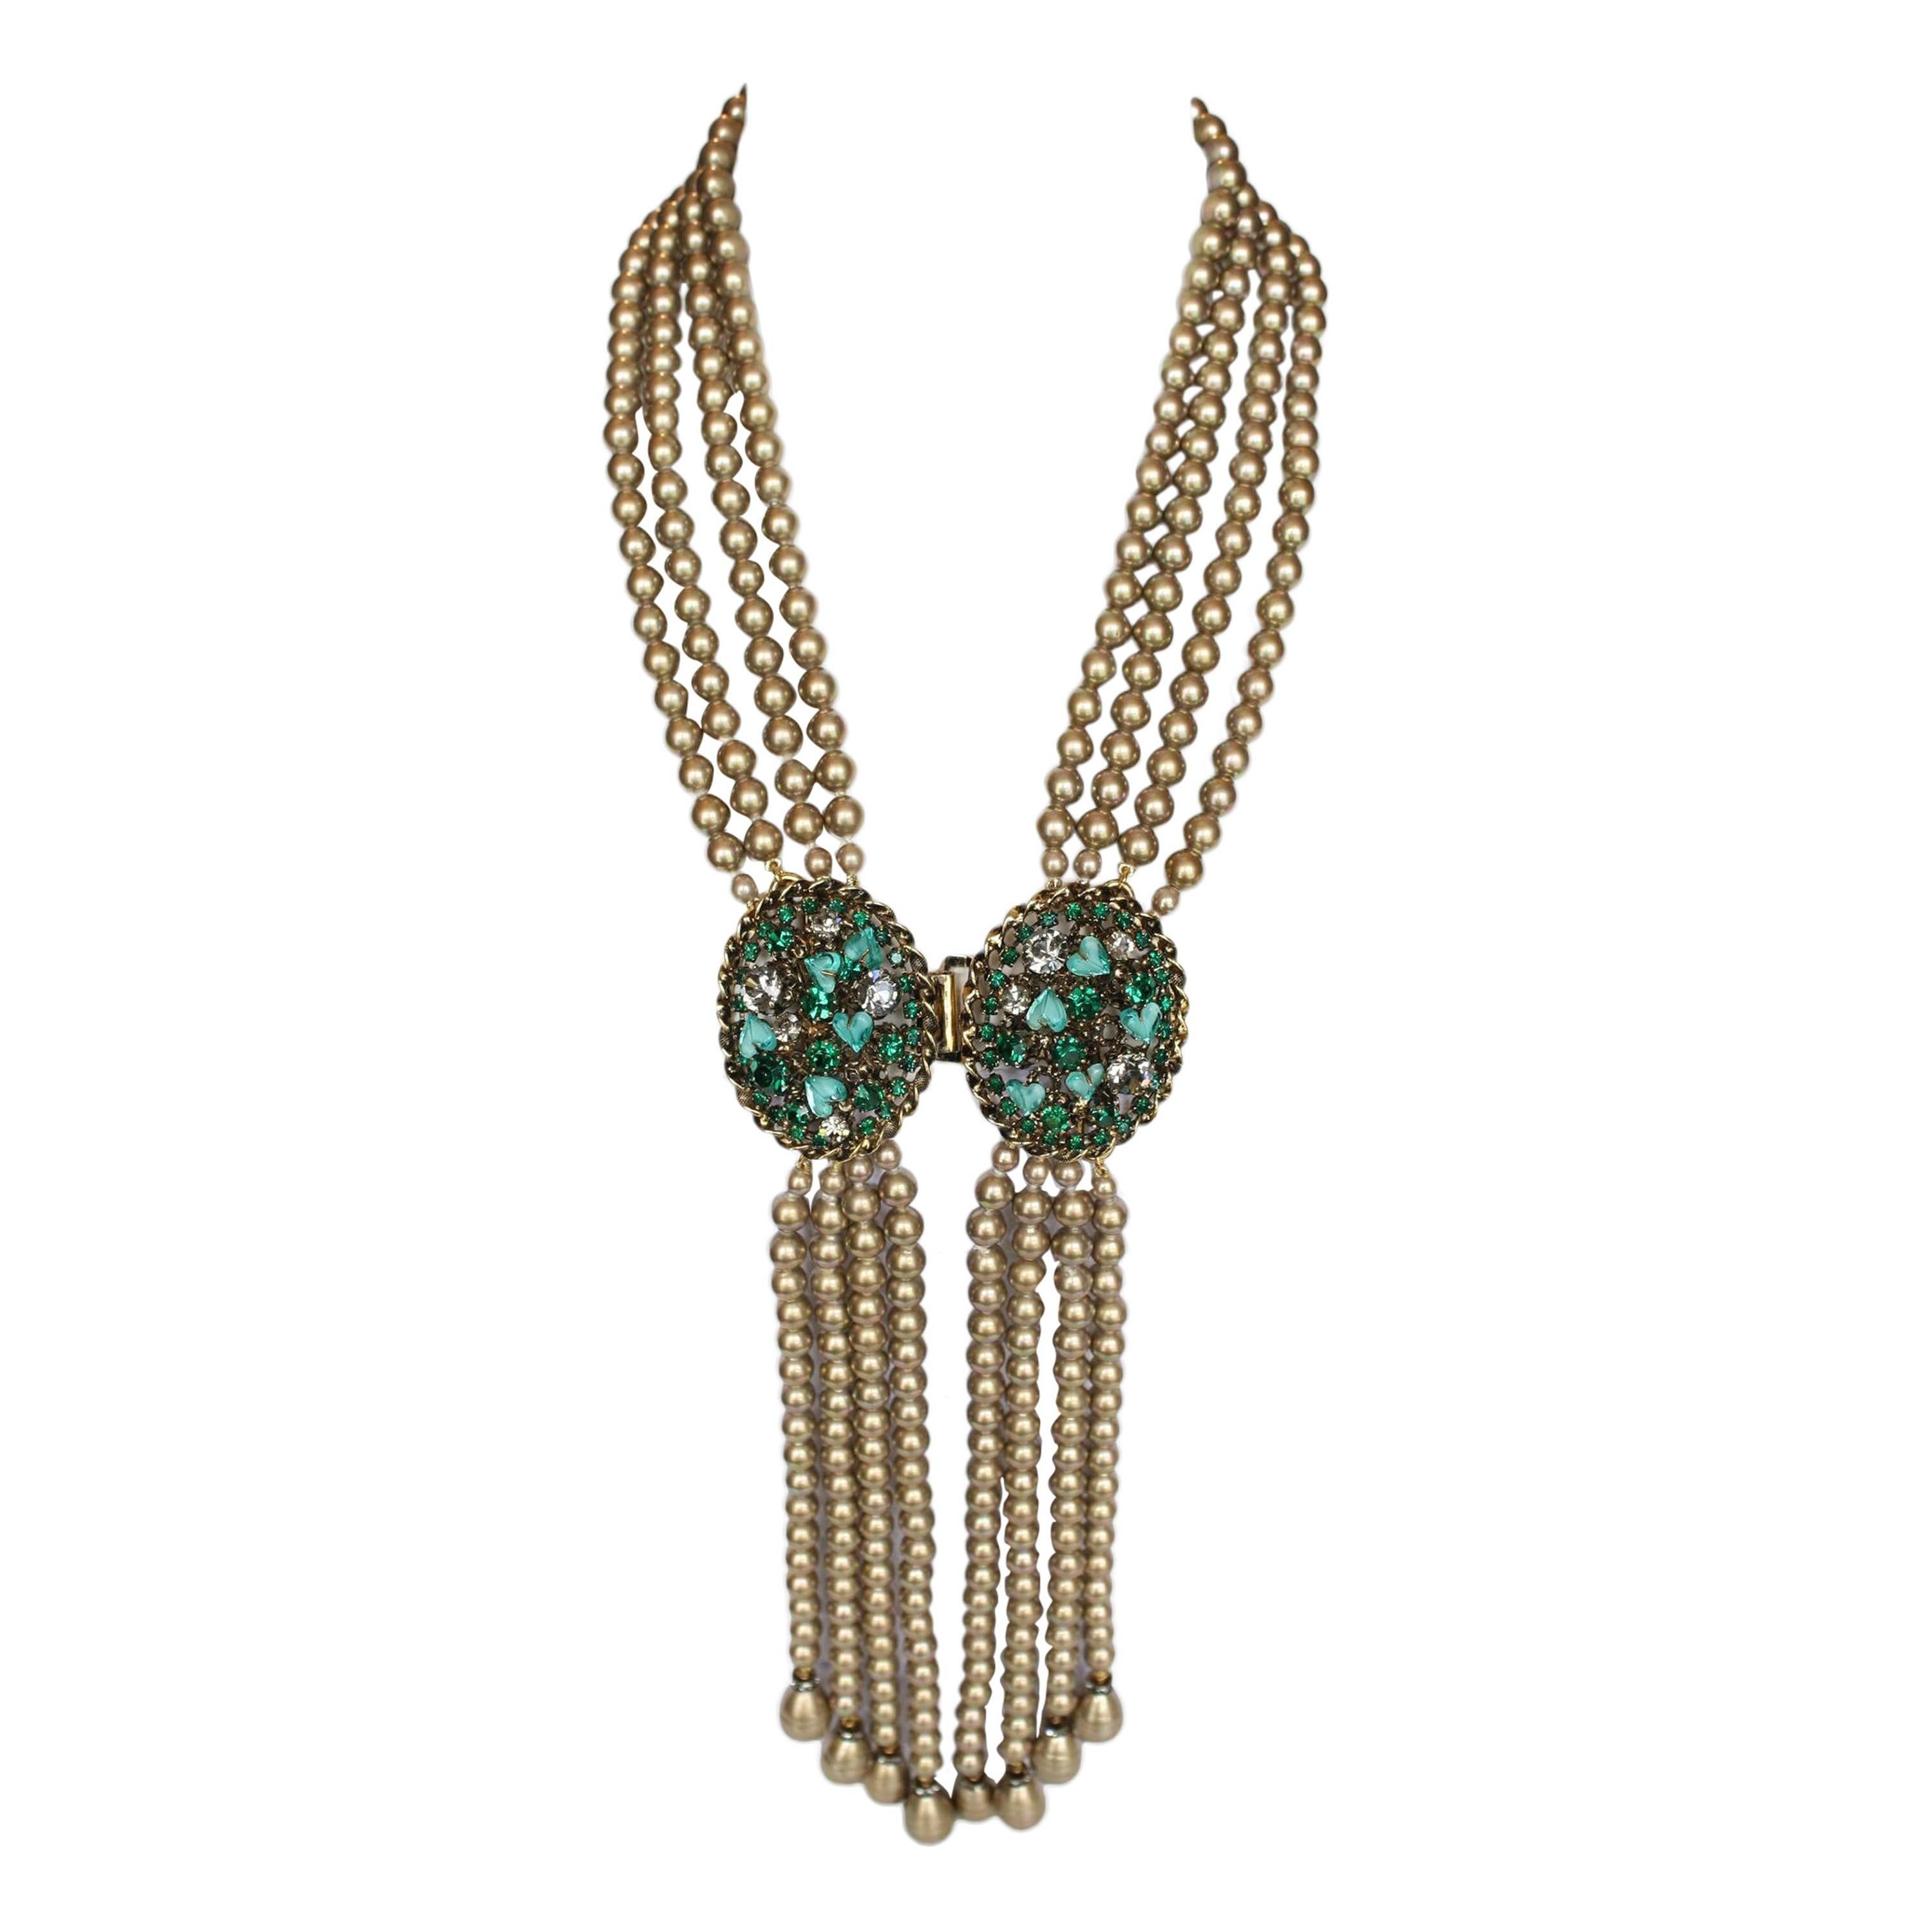 Francoise Montague Champagne Pearl and Green Swarovski Necklace